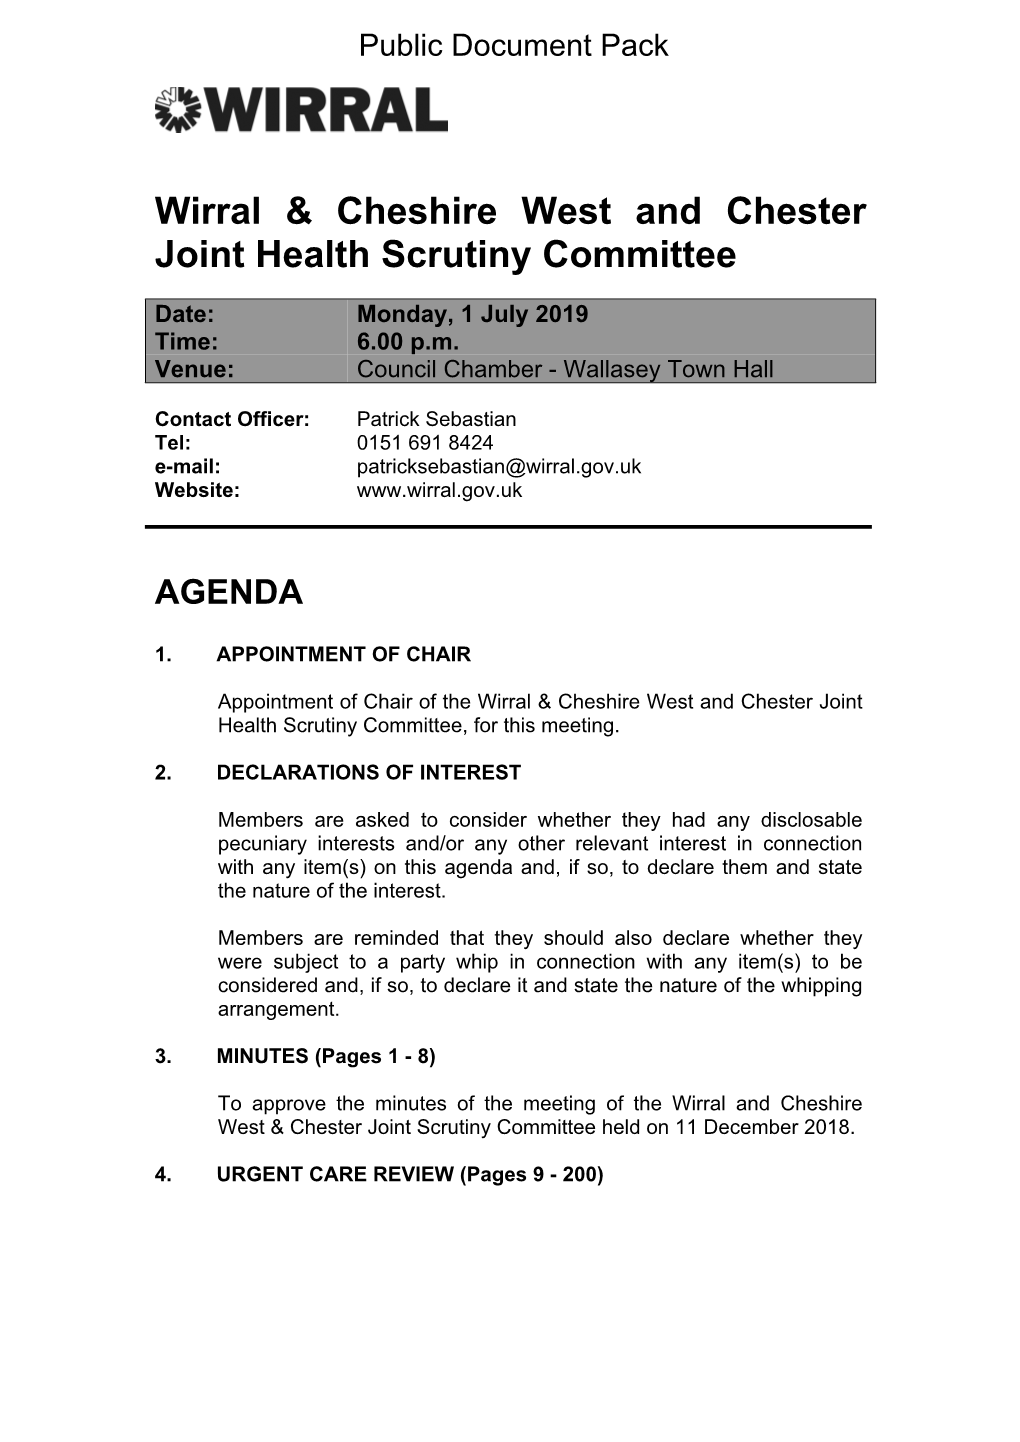 (Public Pack)Agenda Document for Wirral & Cheshire West and Chester Joint Health Scrutiny Committee, 01/07/2019 18:00